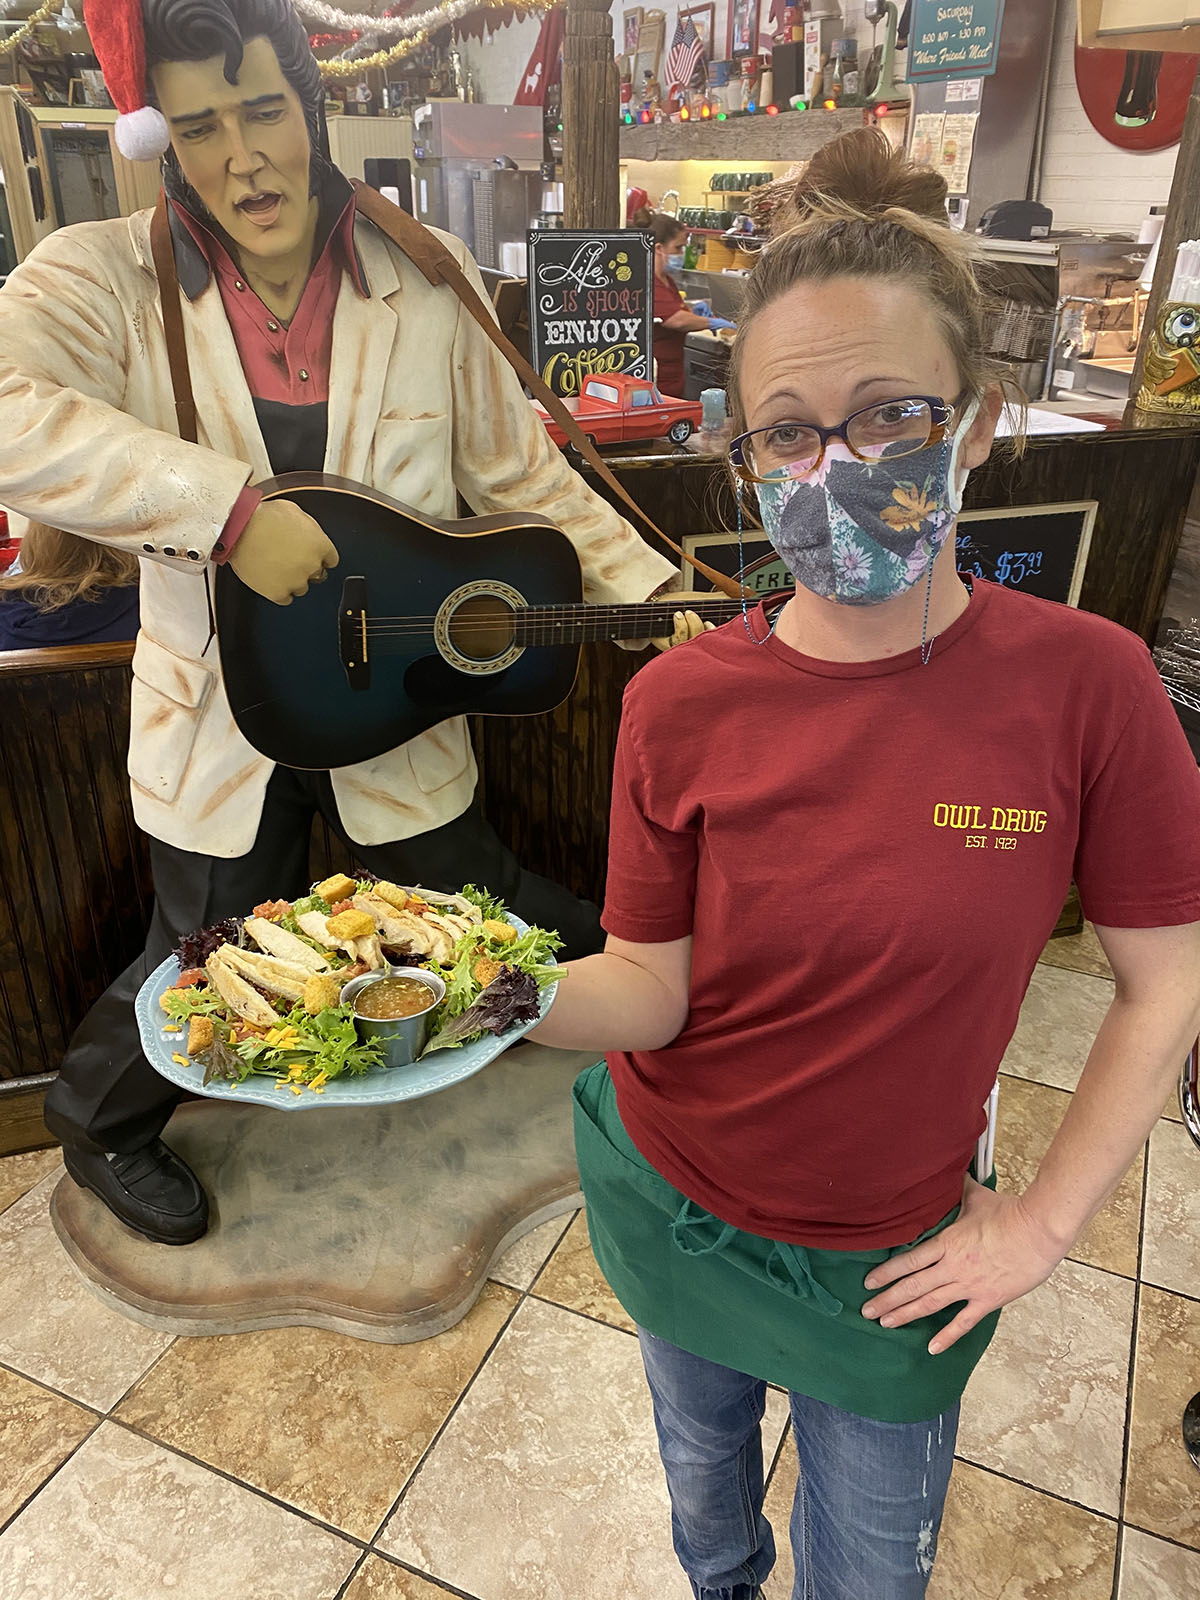 A waitress hold a plate with a large salad and stands in front of the life-size Elvis statue at Owl Drug.